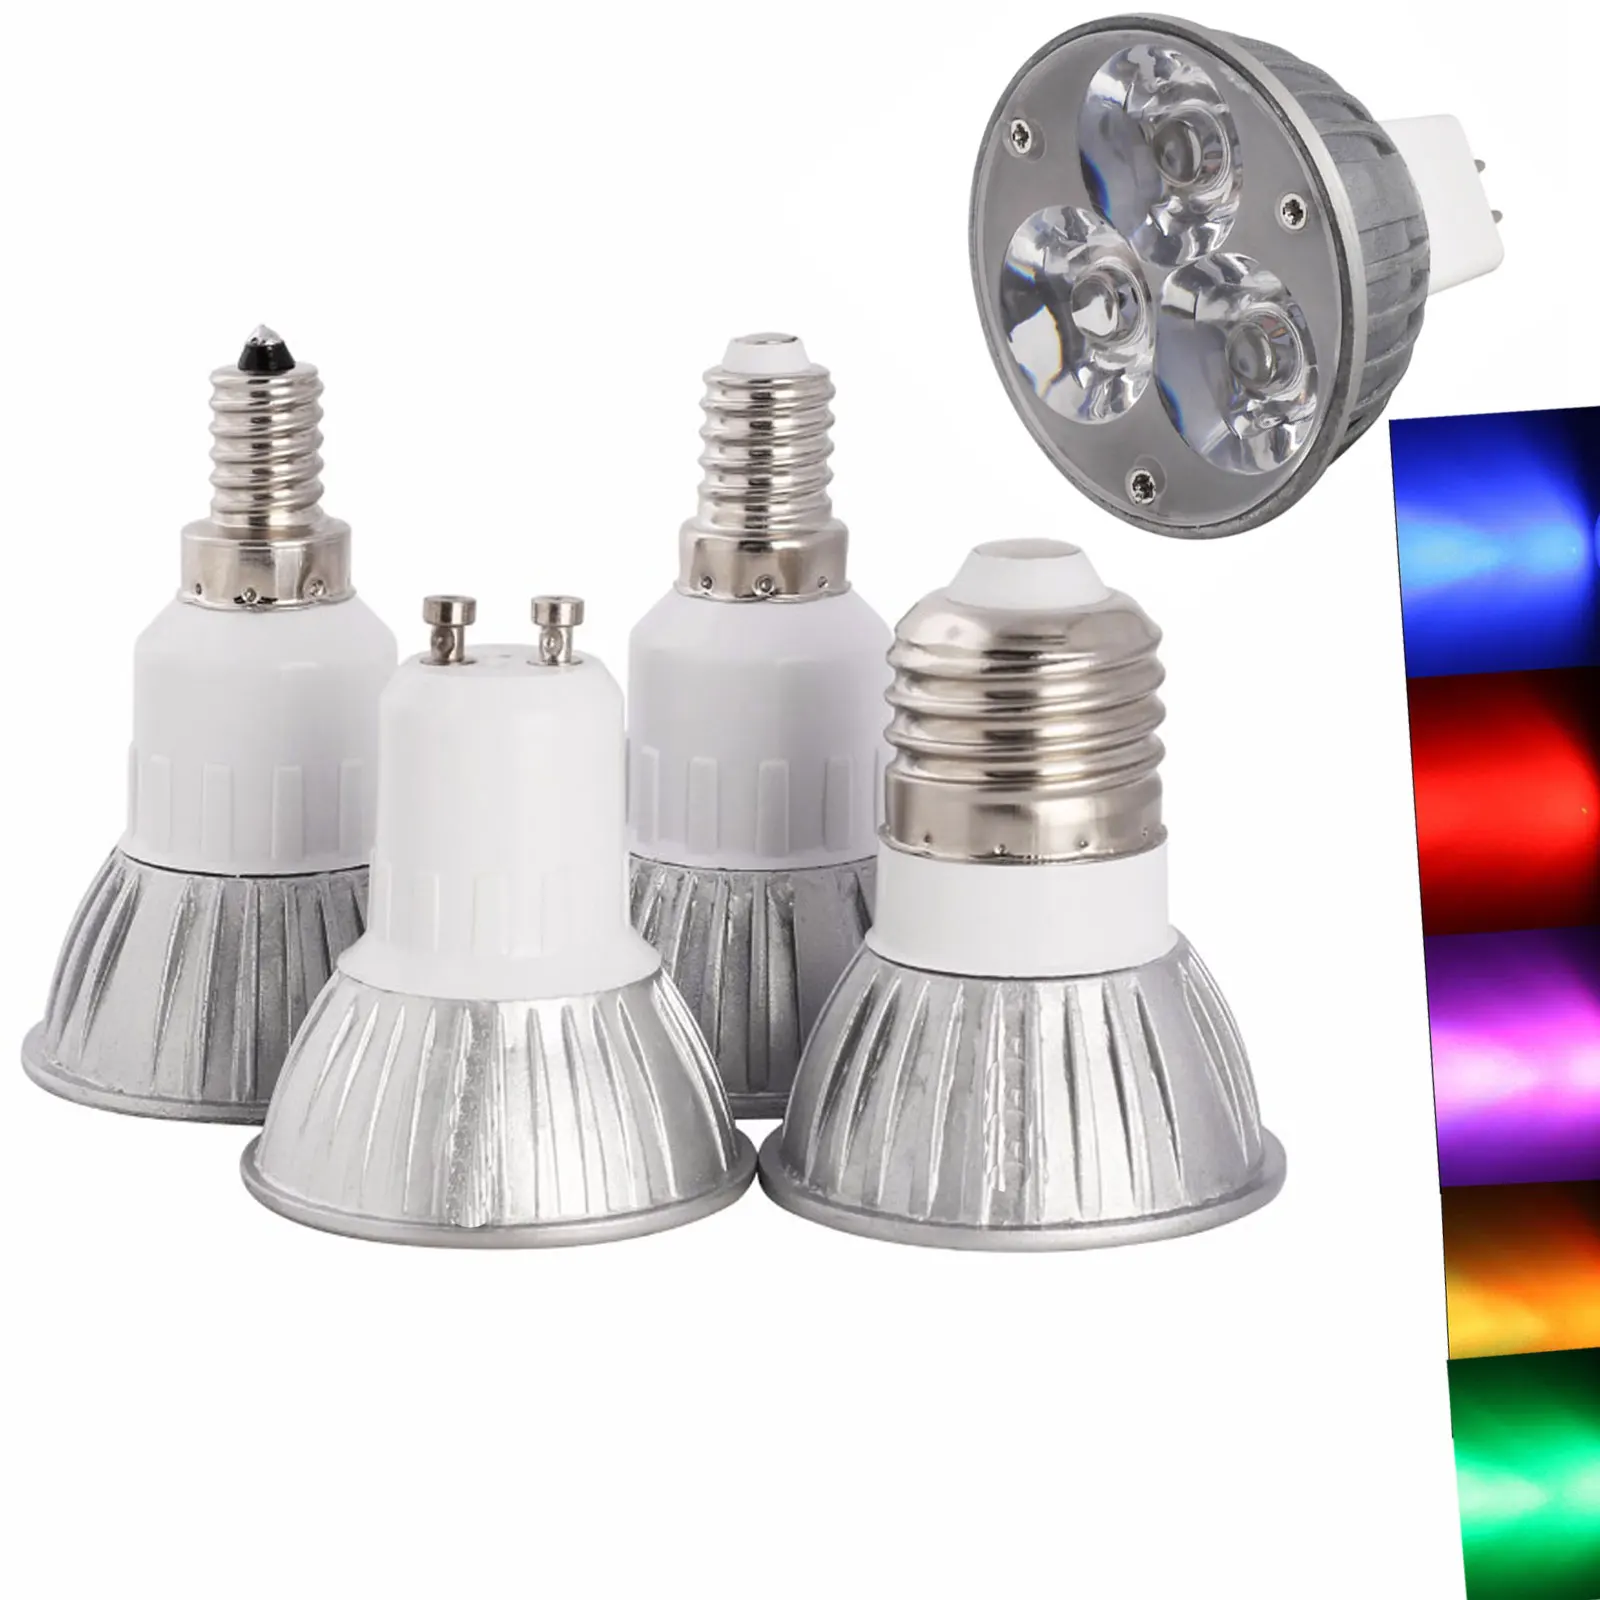 

3W LED Bulb GU10 MR16 E27 E14 E12 B15 B22 GU5.3 LED Spotlight Light Bulb Chandeliers Replace Halogen Lamp AC 85-264V